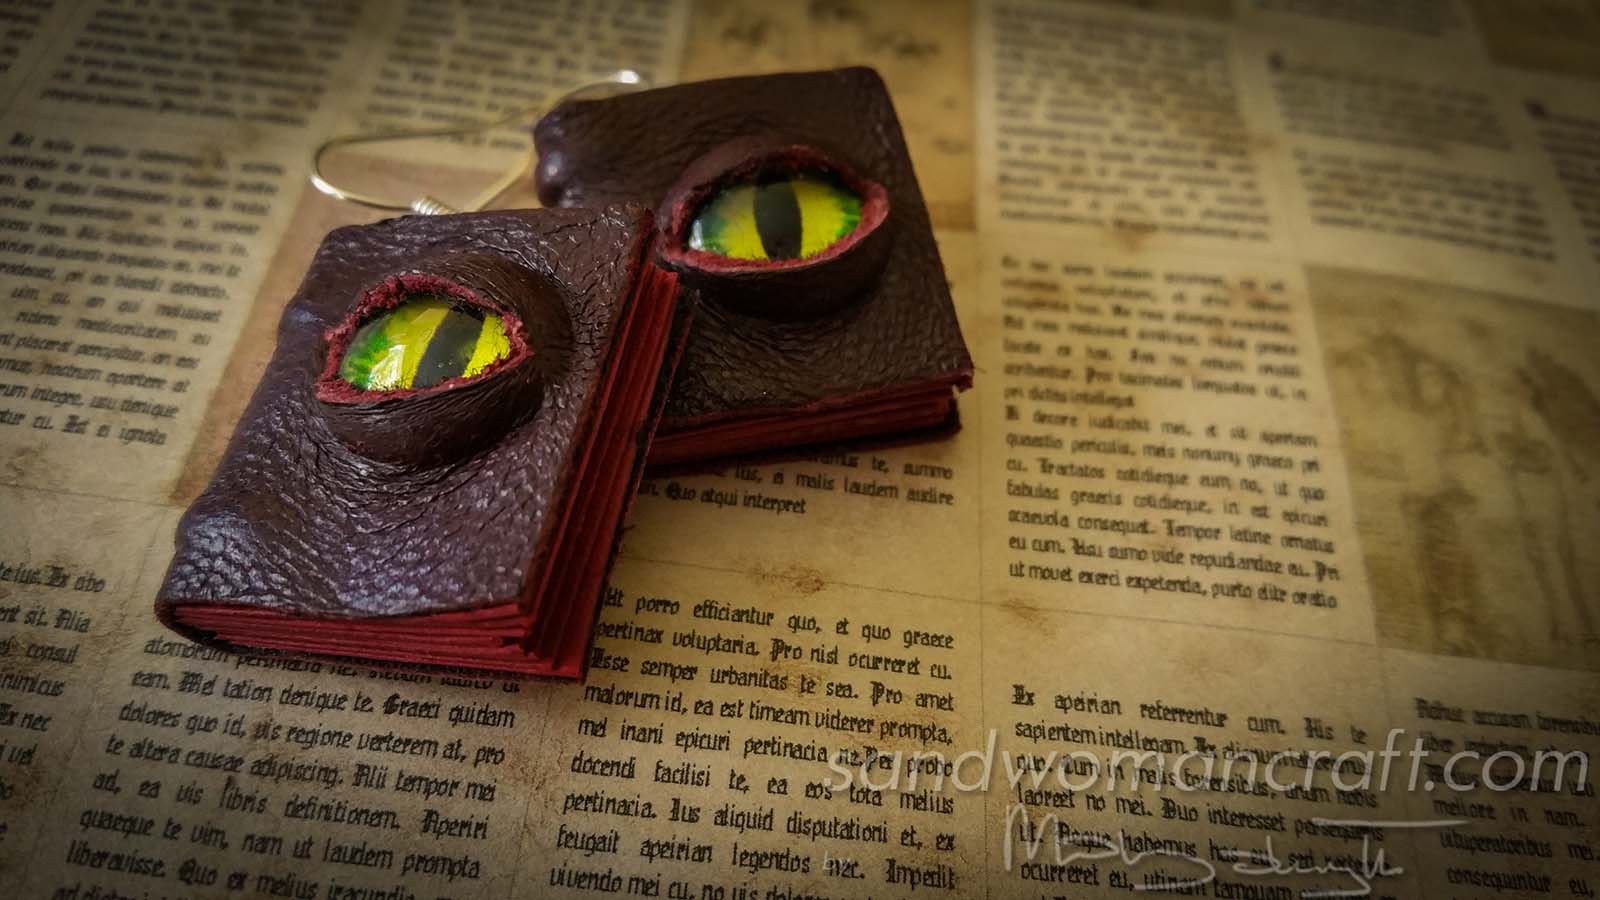 Miniature leather book earrings with glass dragon's eye cover